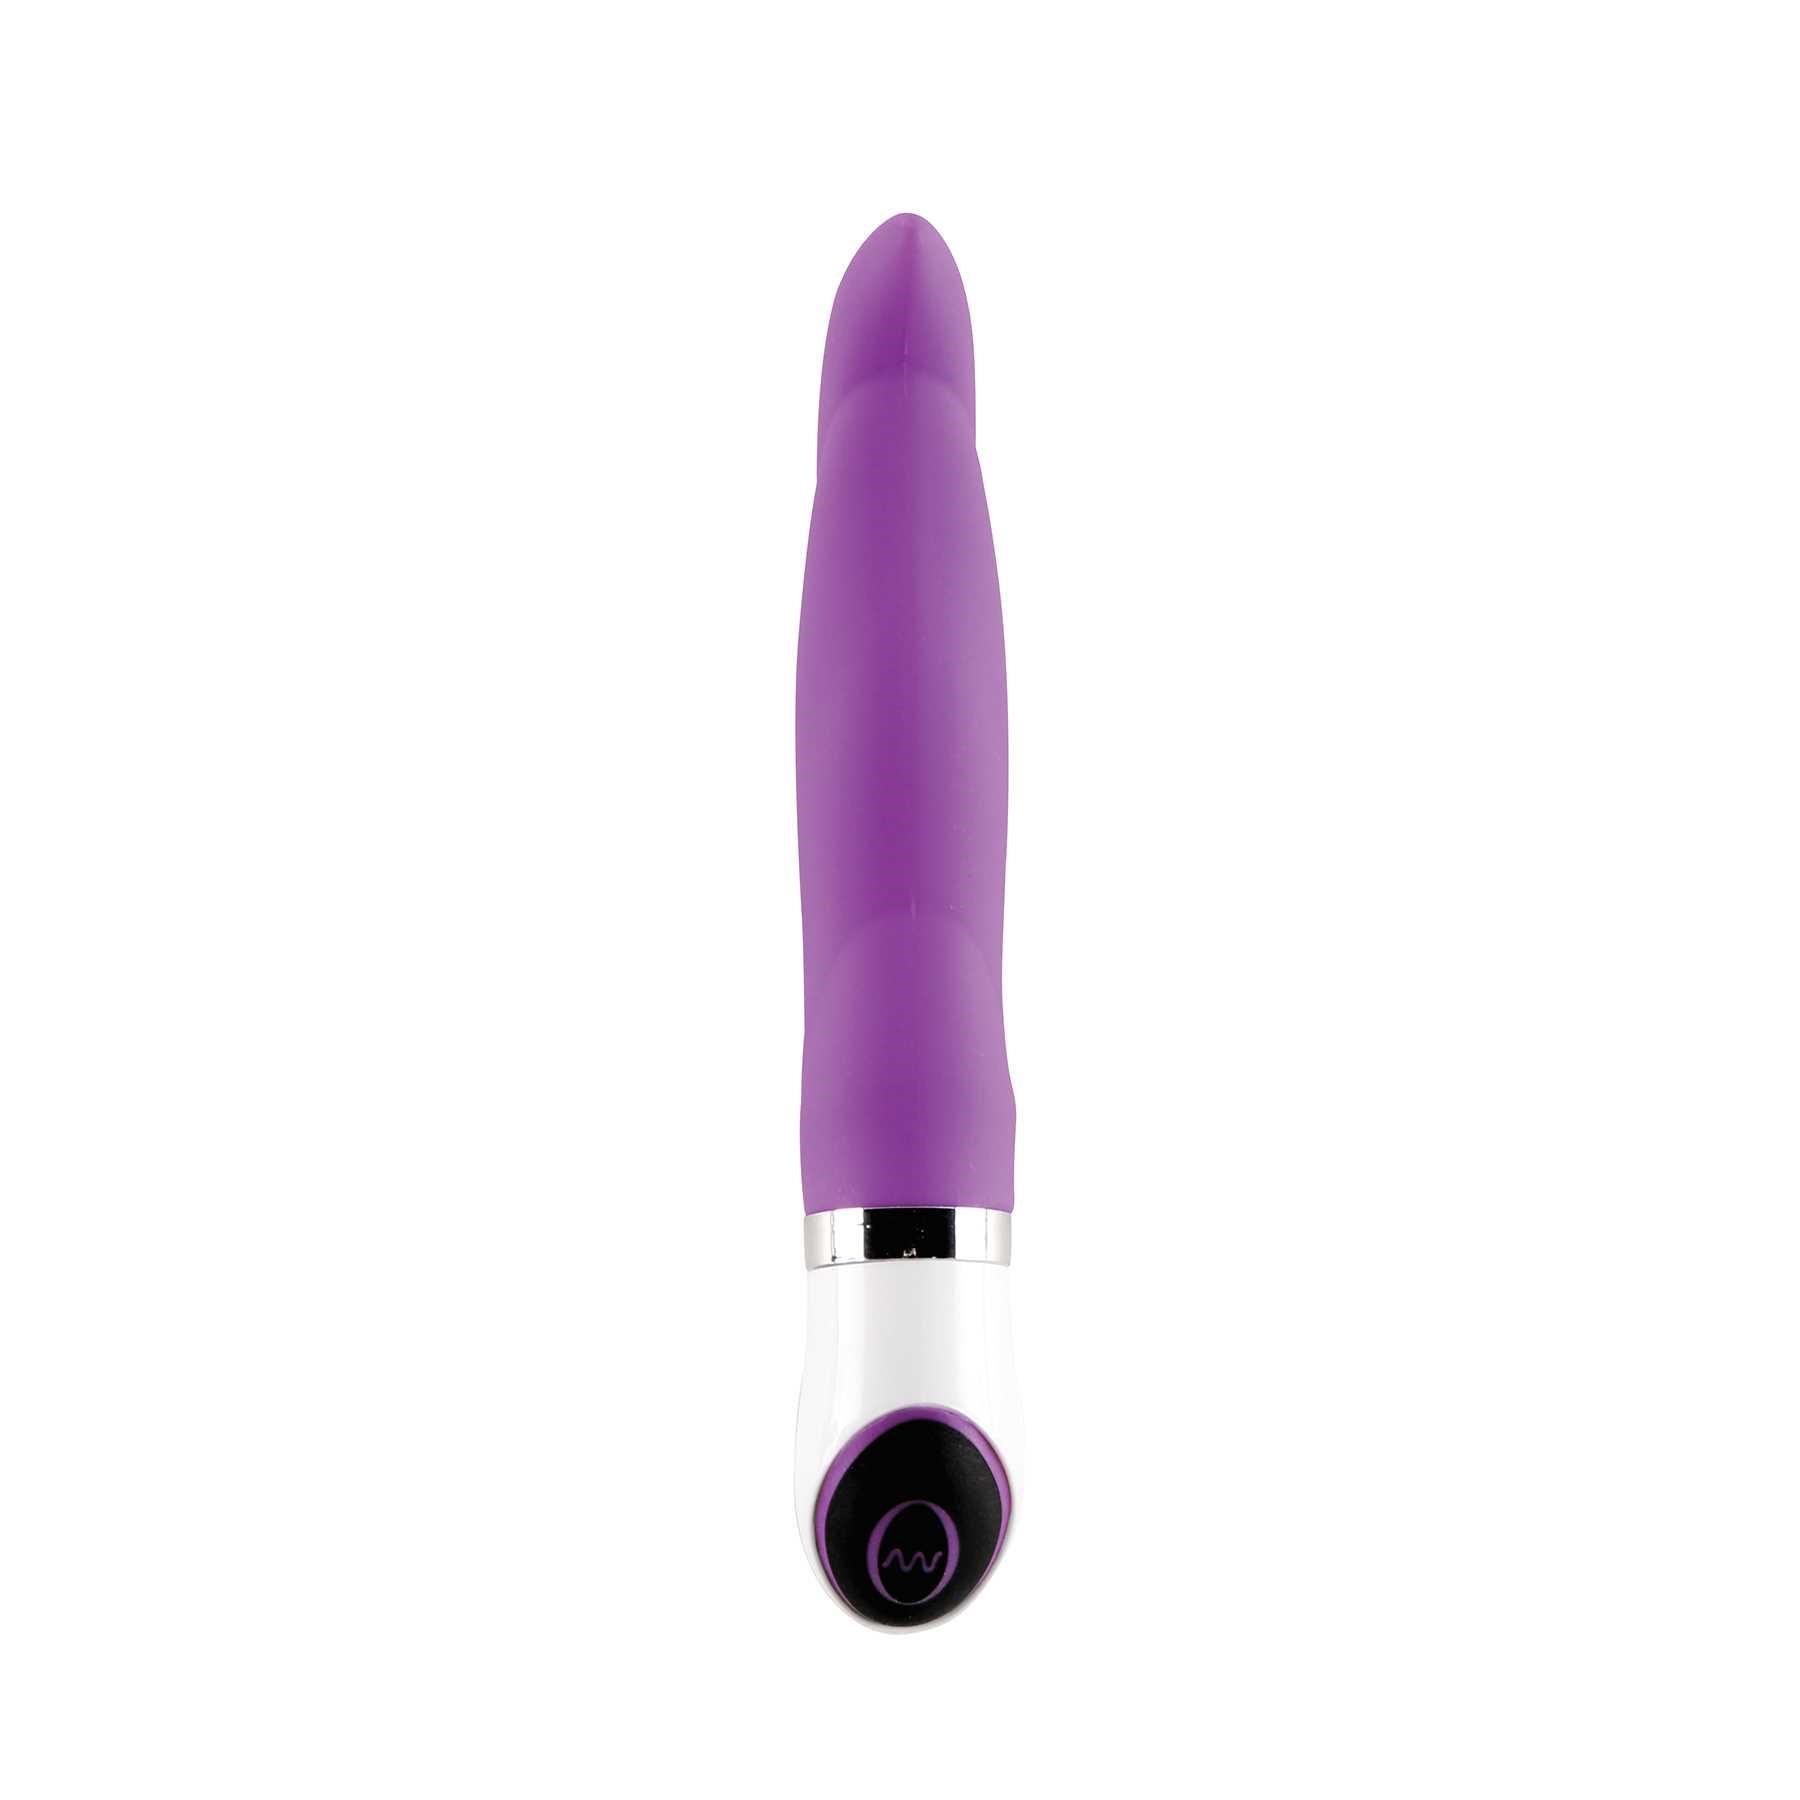 Swirl Silicone Vibe standing upright